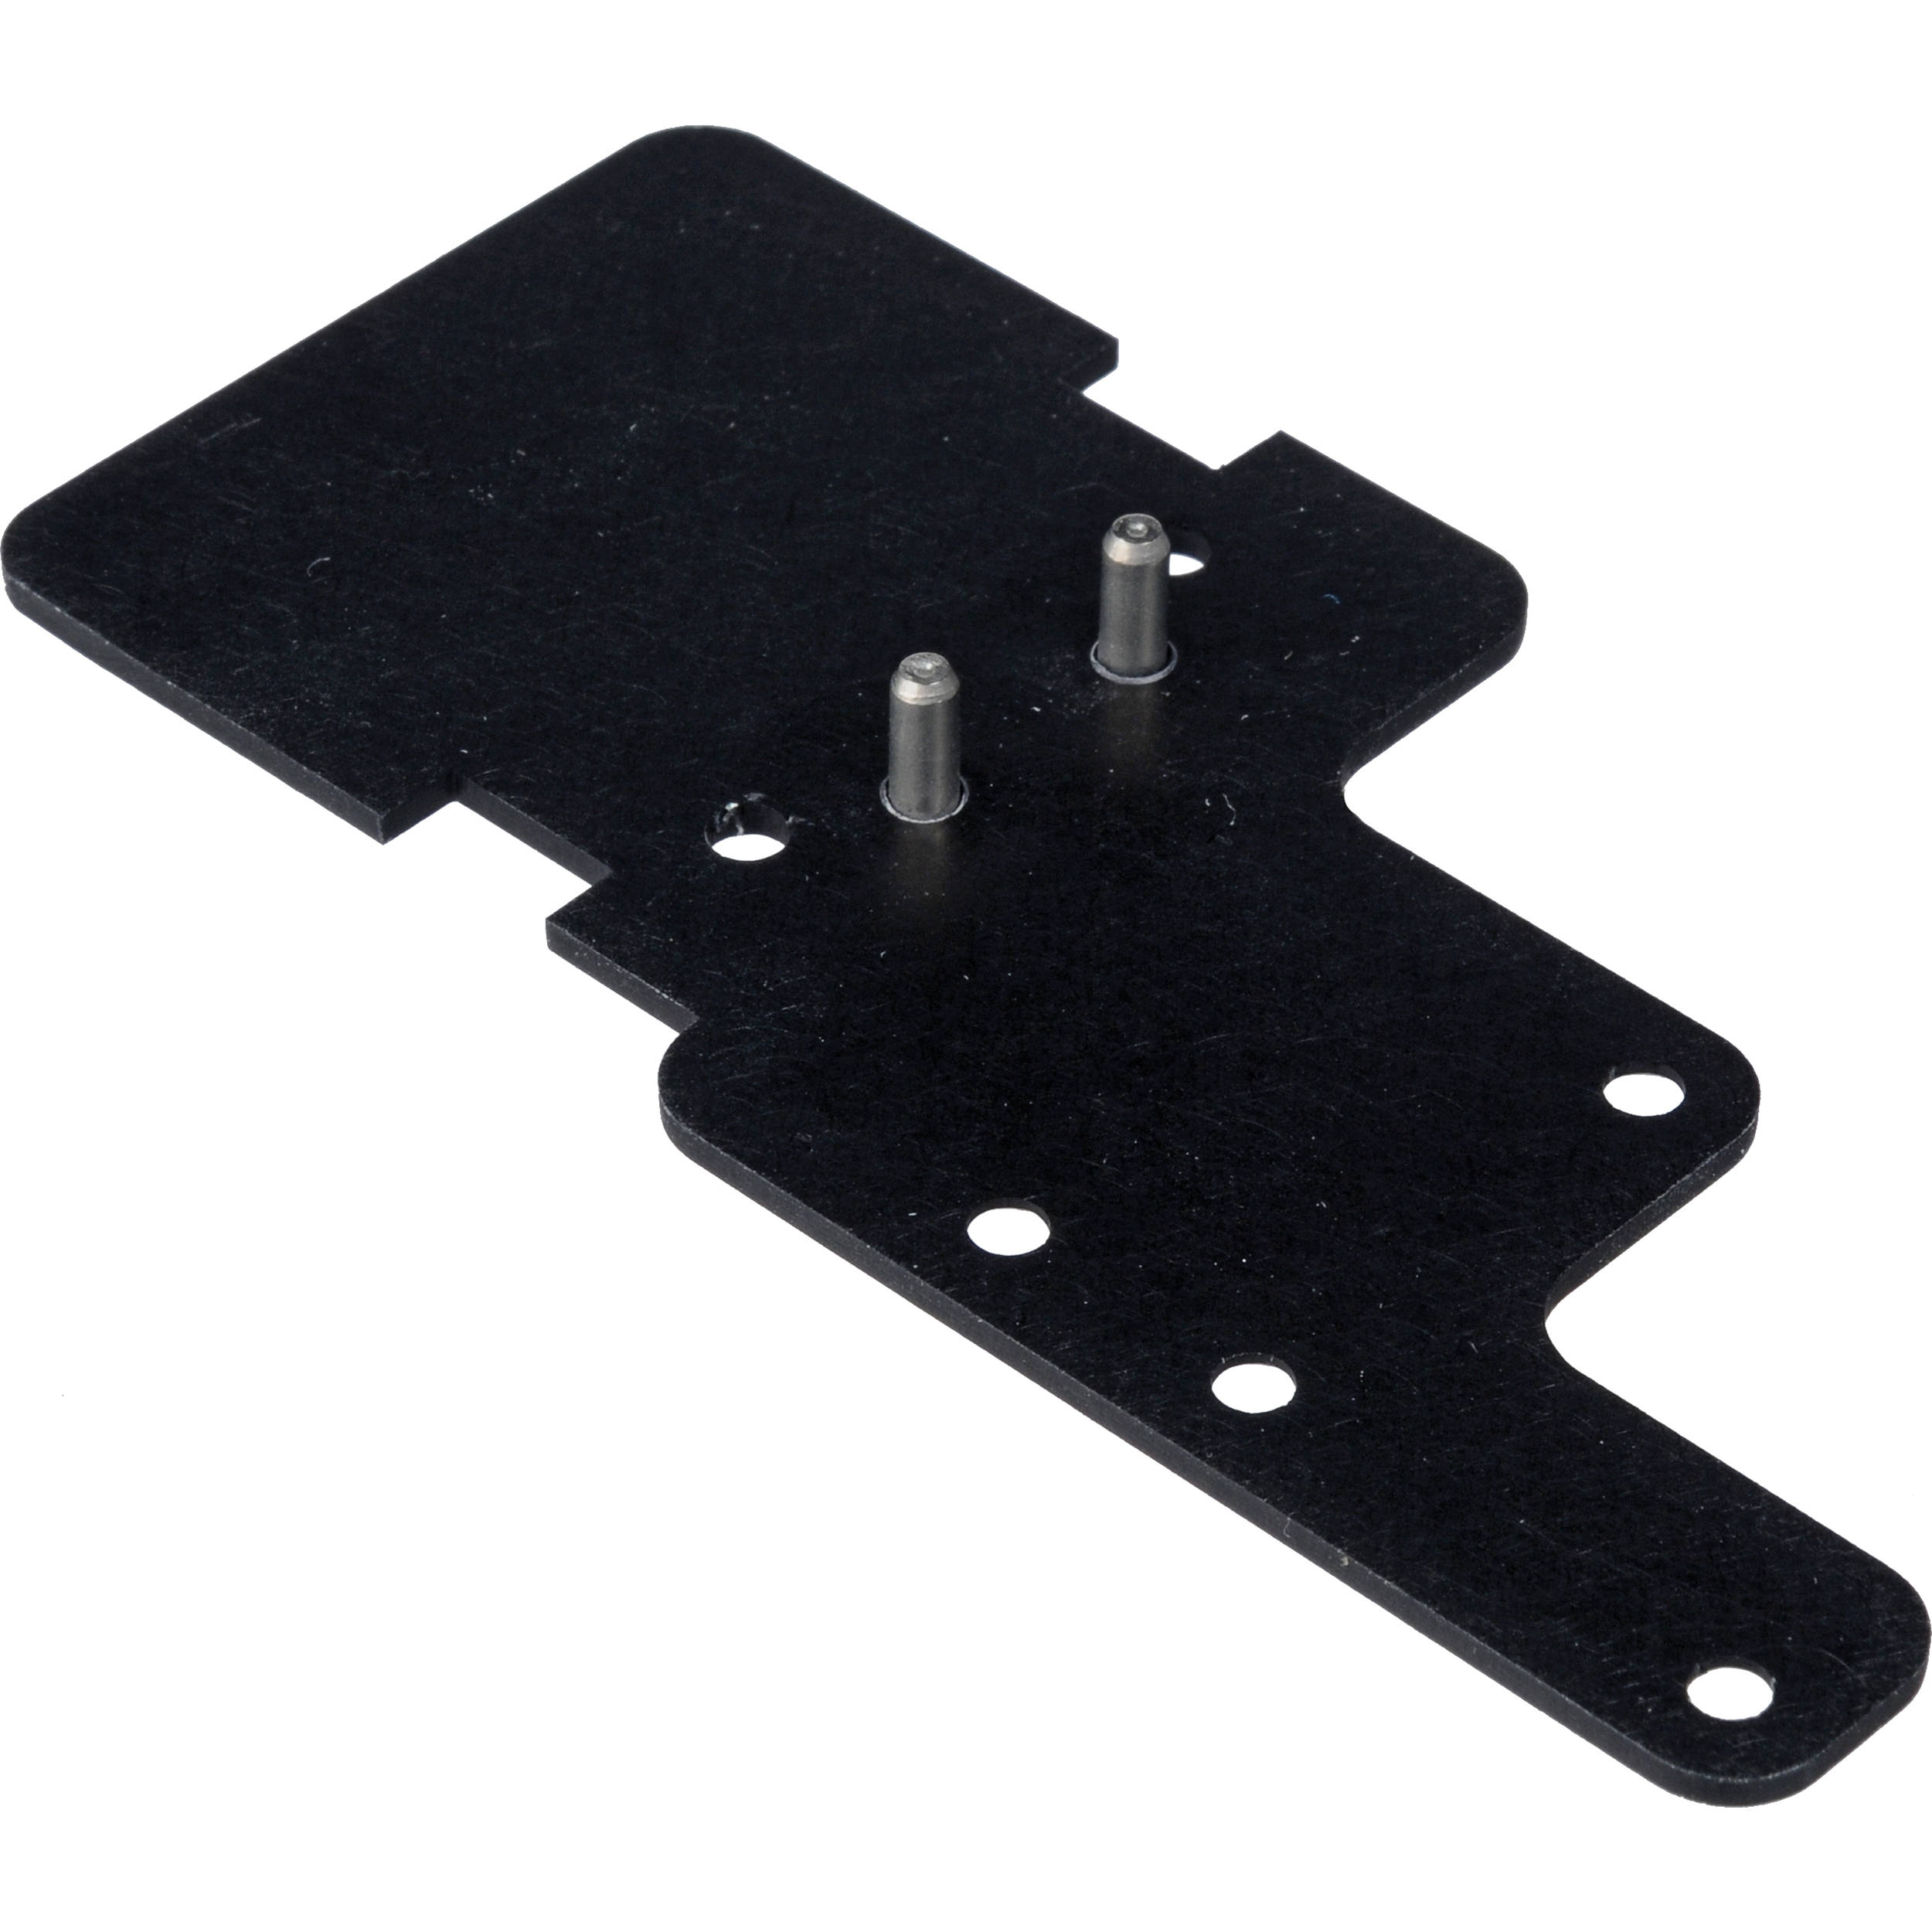 WIRELESS MIC RECEIVER BRACKET FOR GY-HM600 SERIES